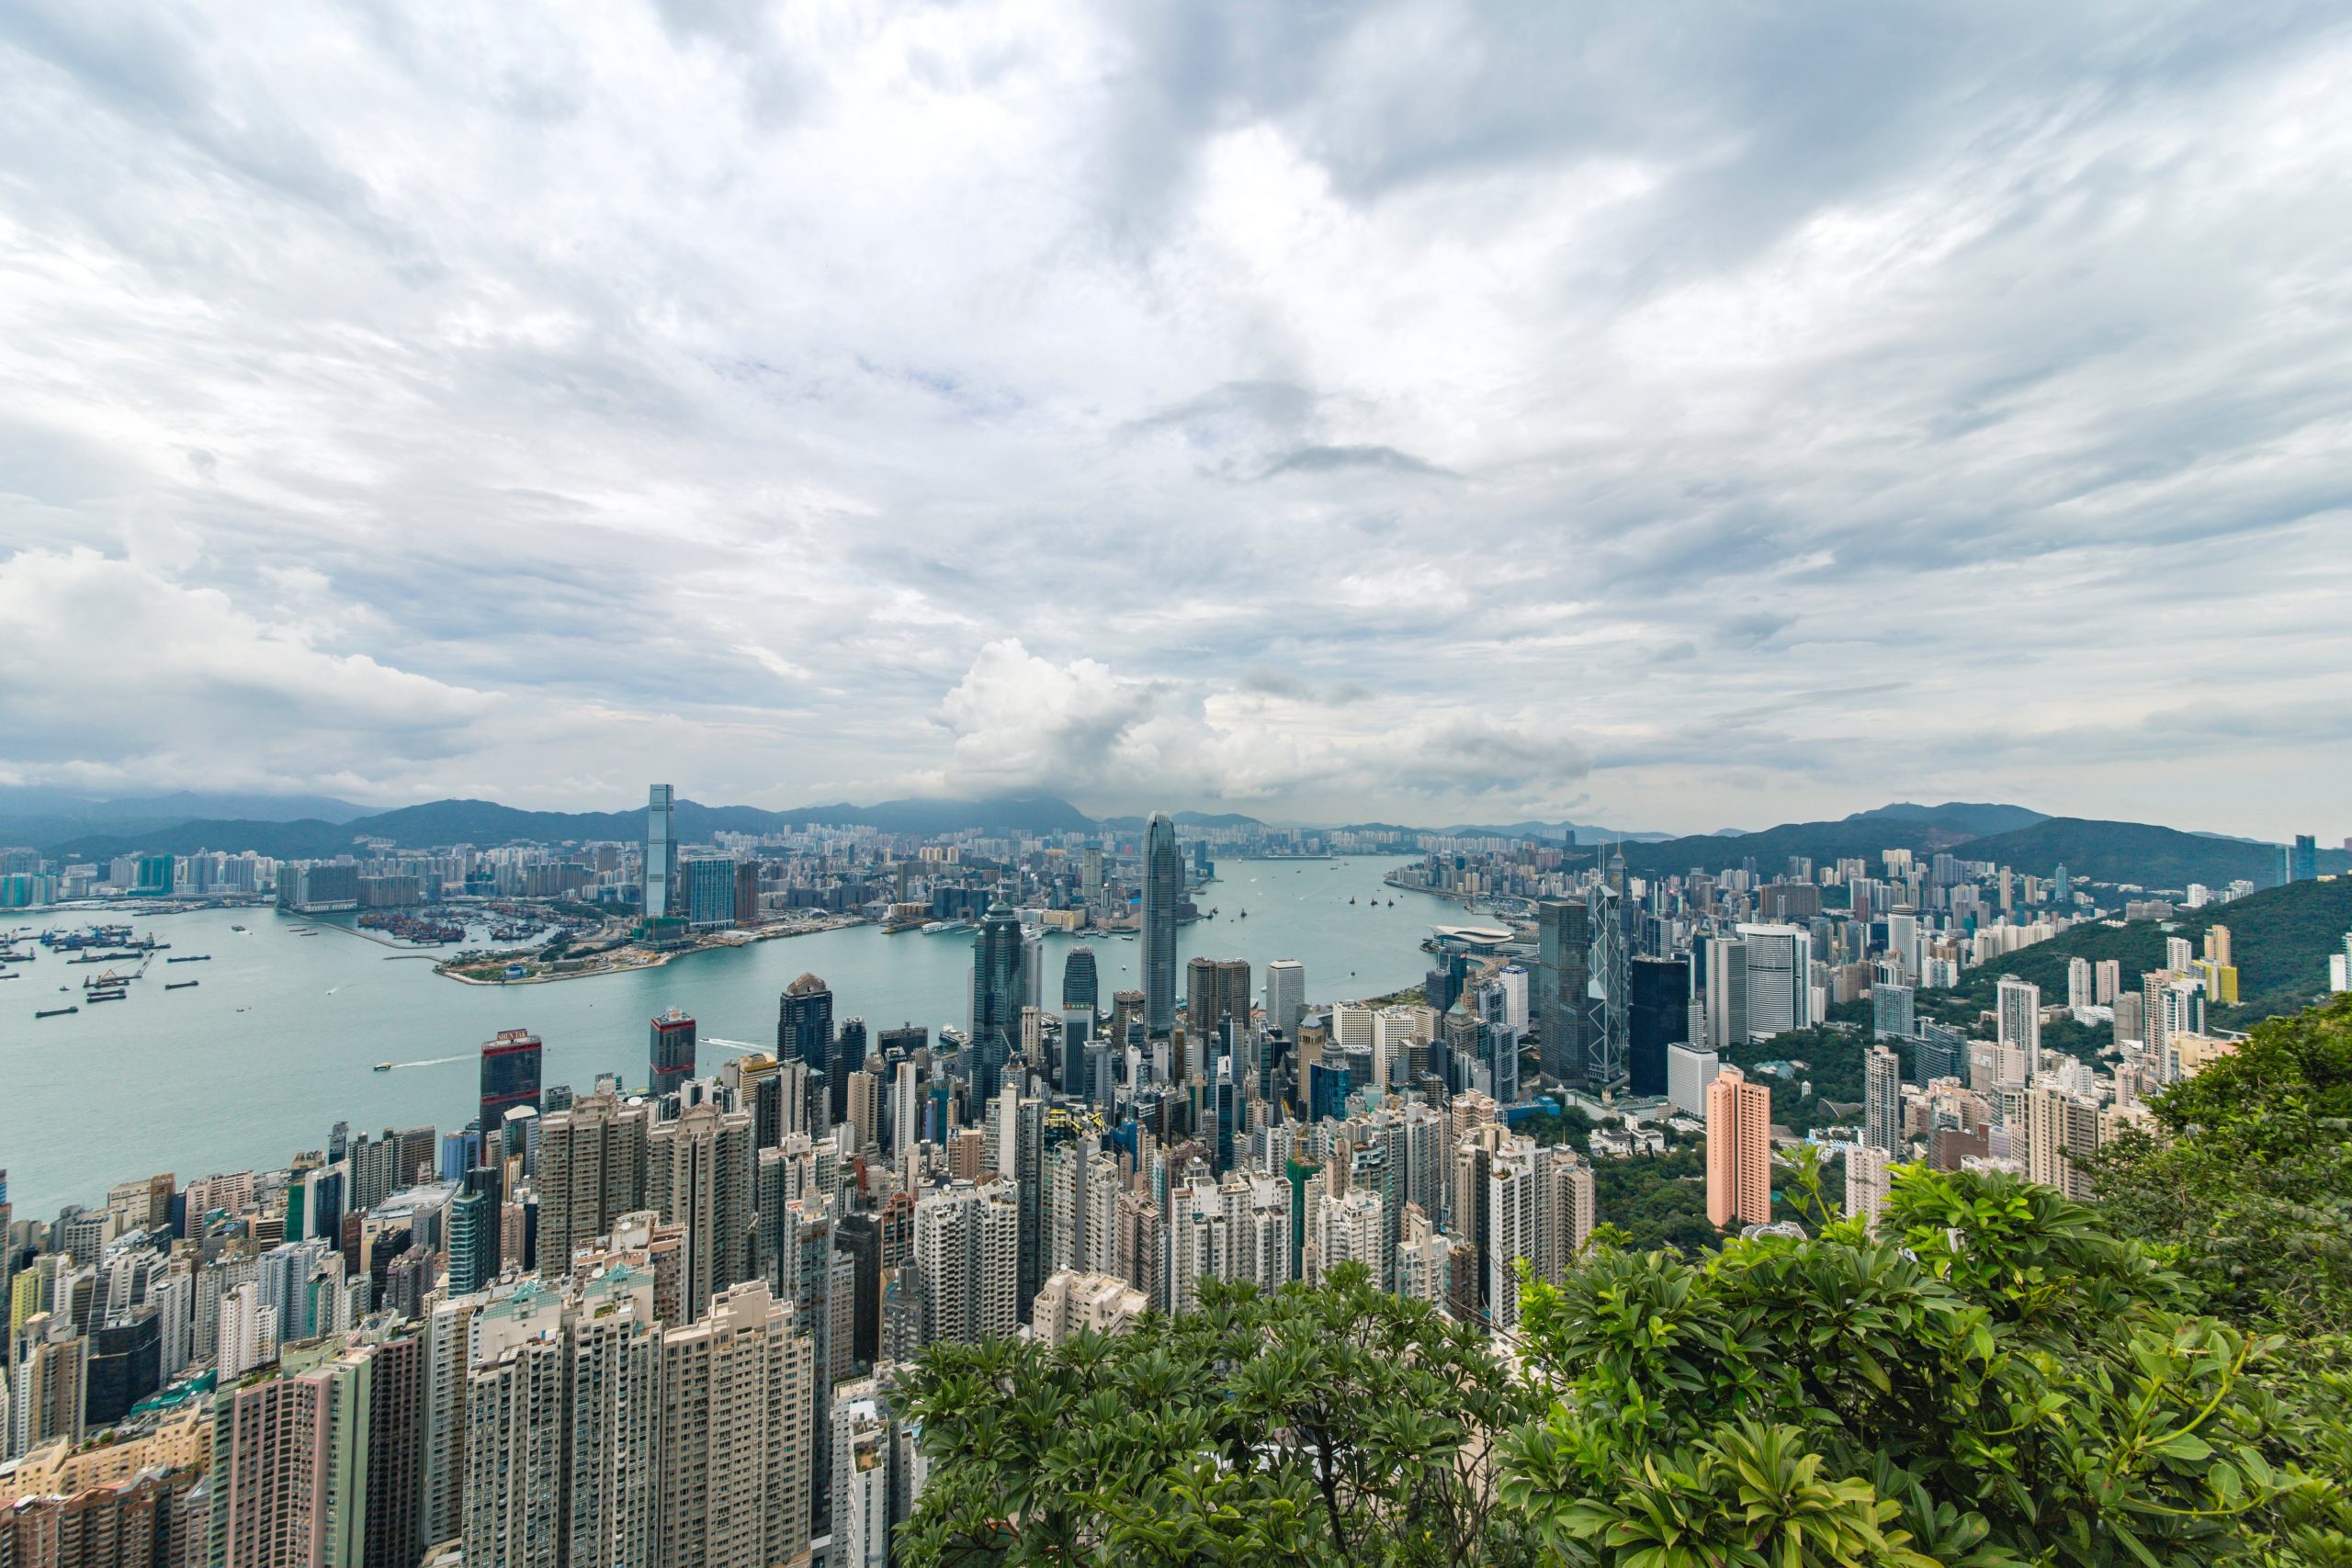 Hong Kong attracts people through talent admission schemes